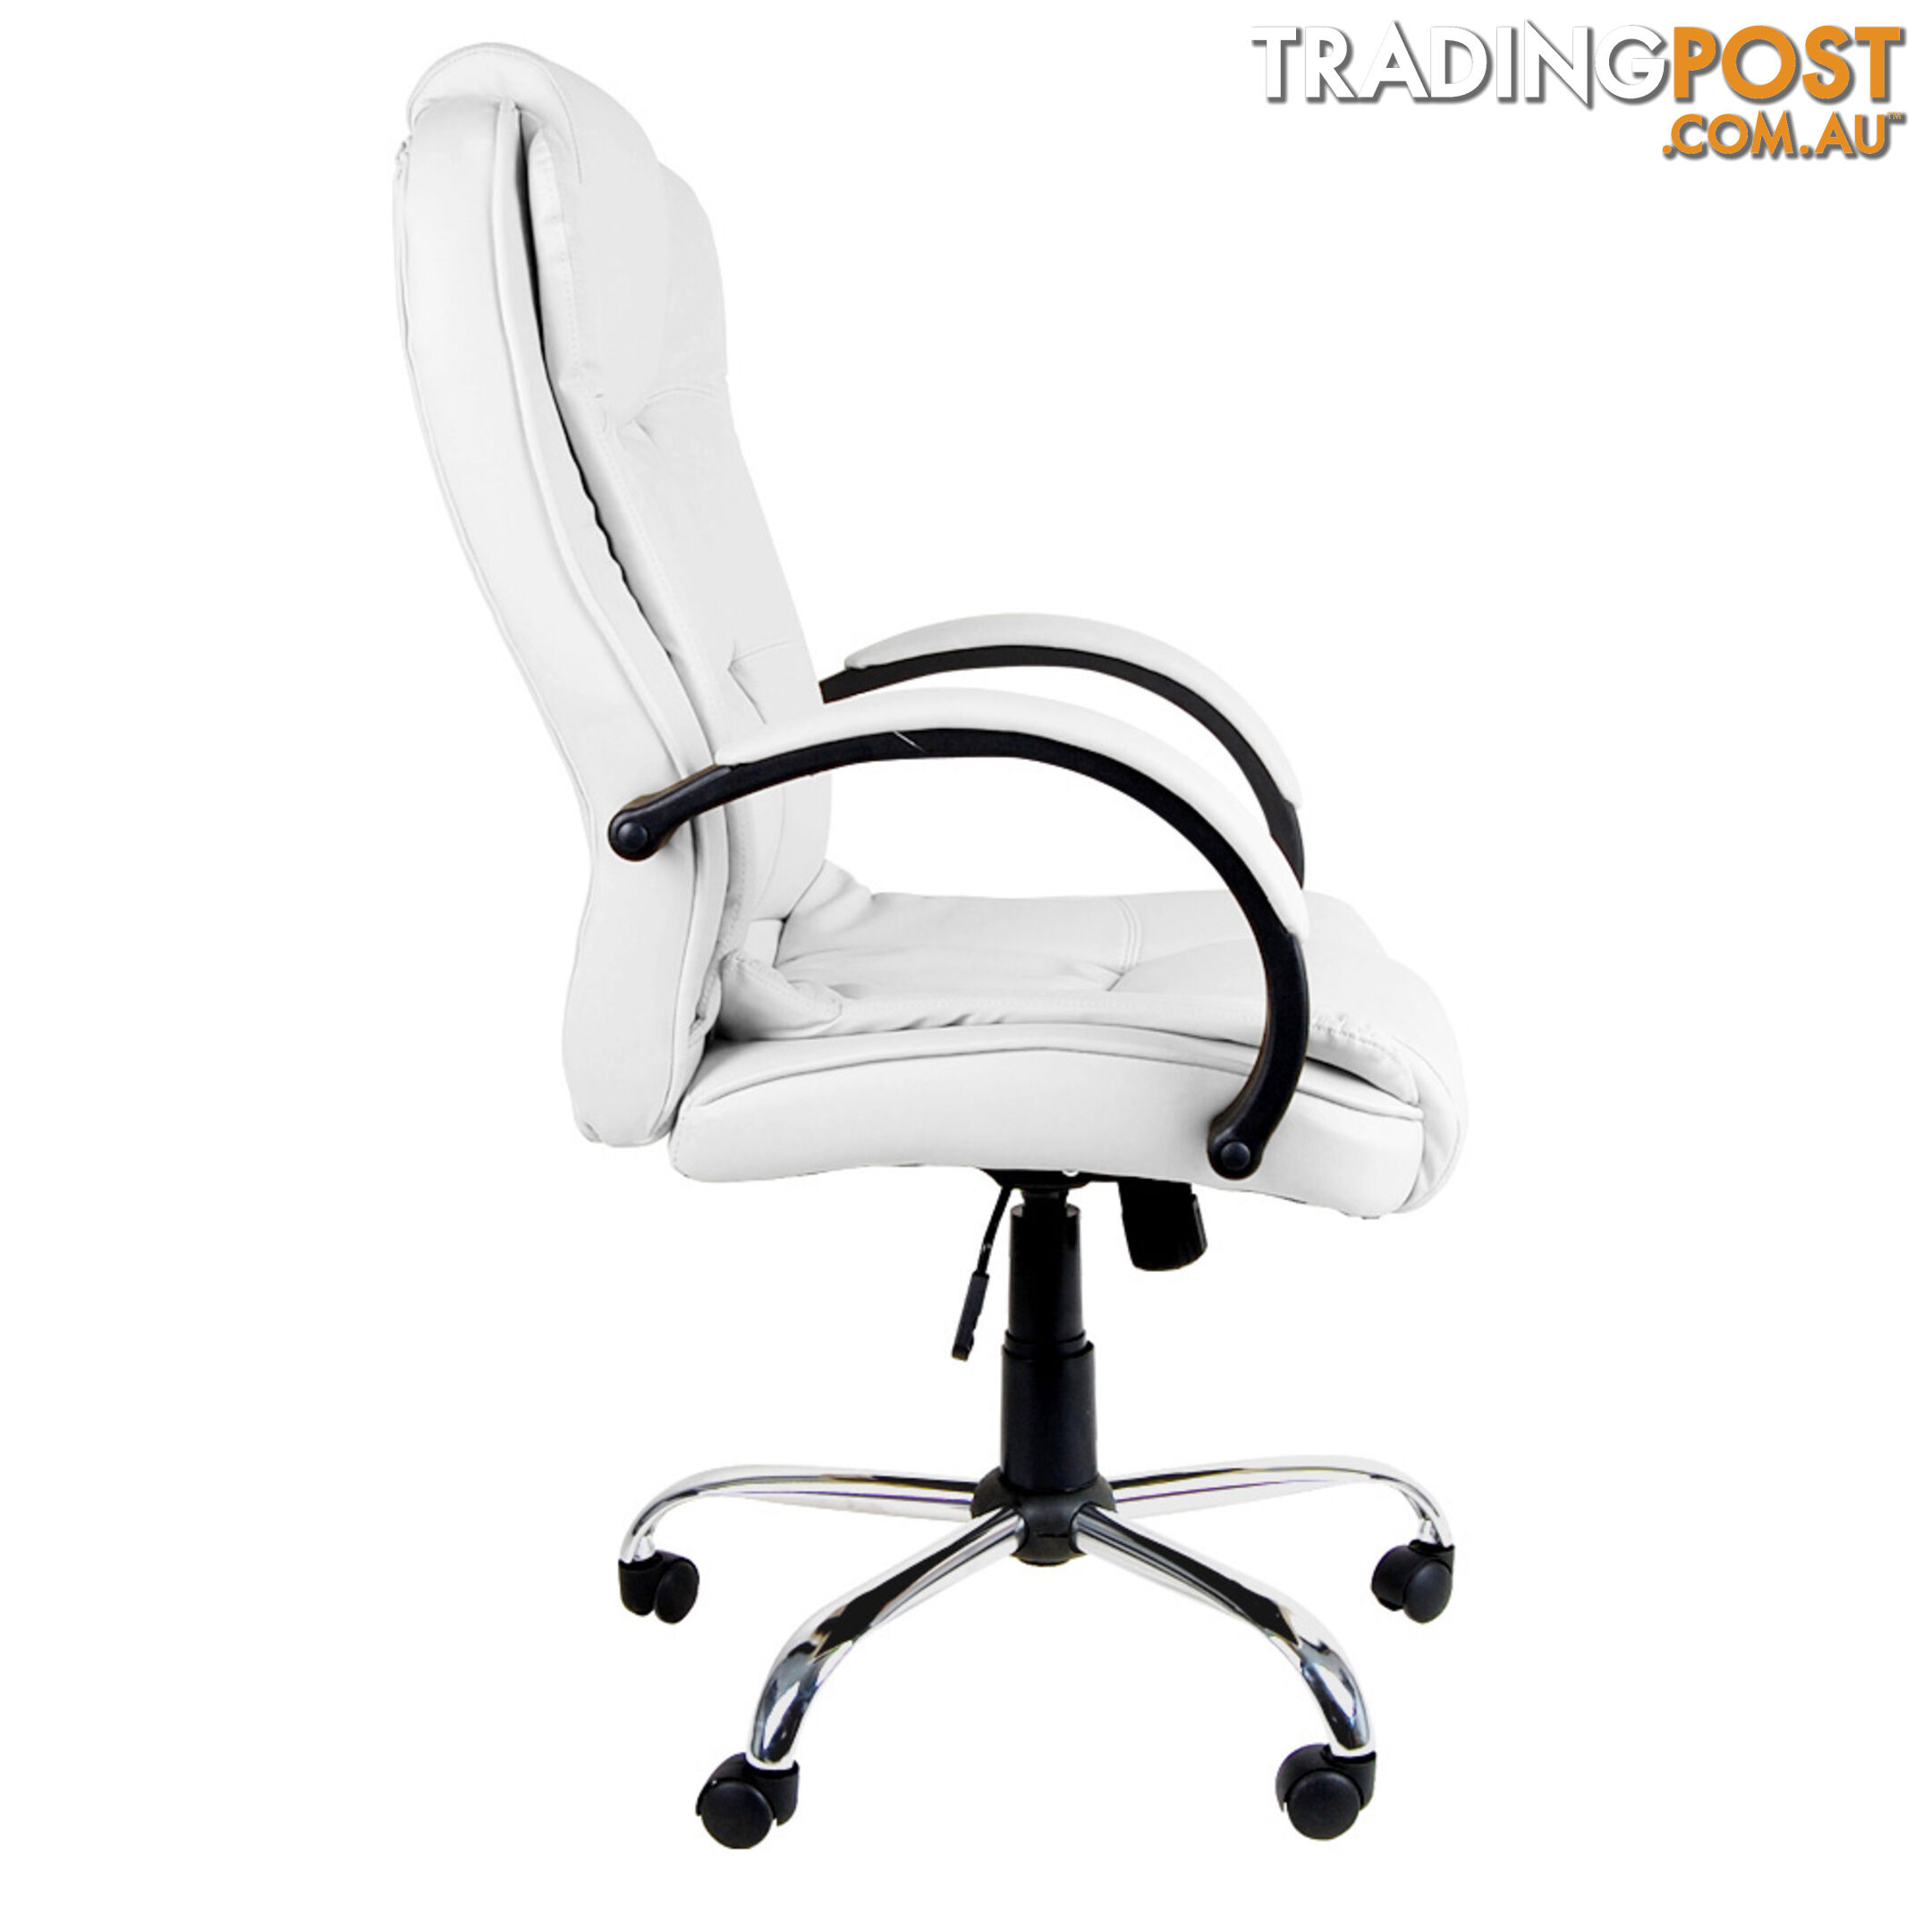 Executive PU Leather Office Computer Chair White